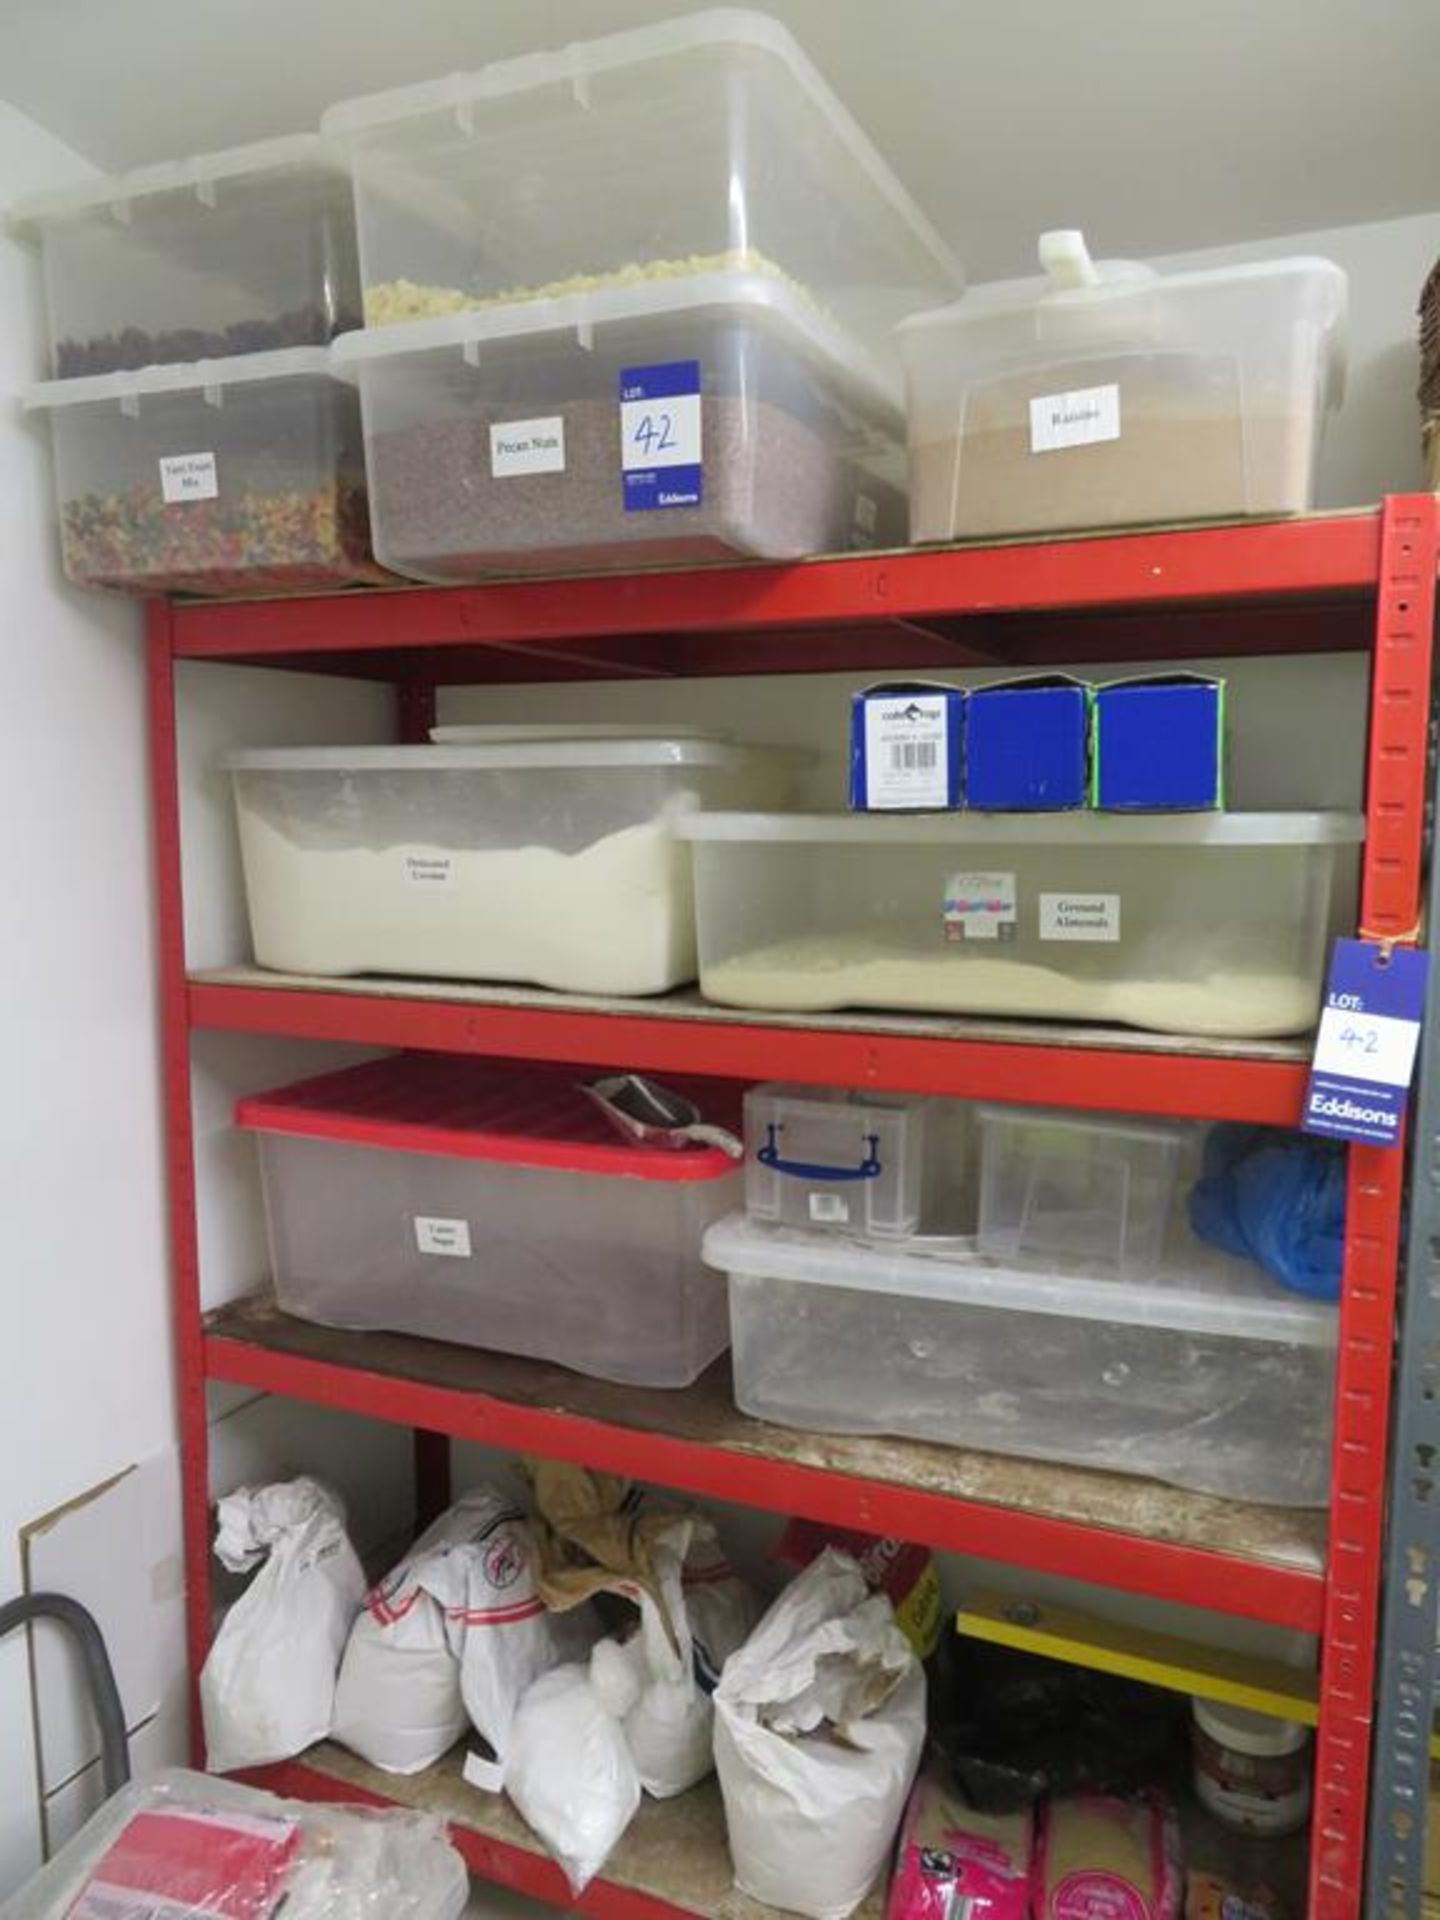 2 x Storage Racks, Trolley and Contents. Baking Ingredients, Tools, Packaging etc - Image 3 of 5